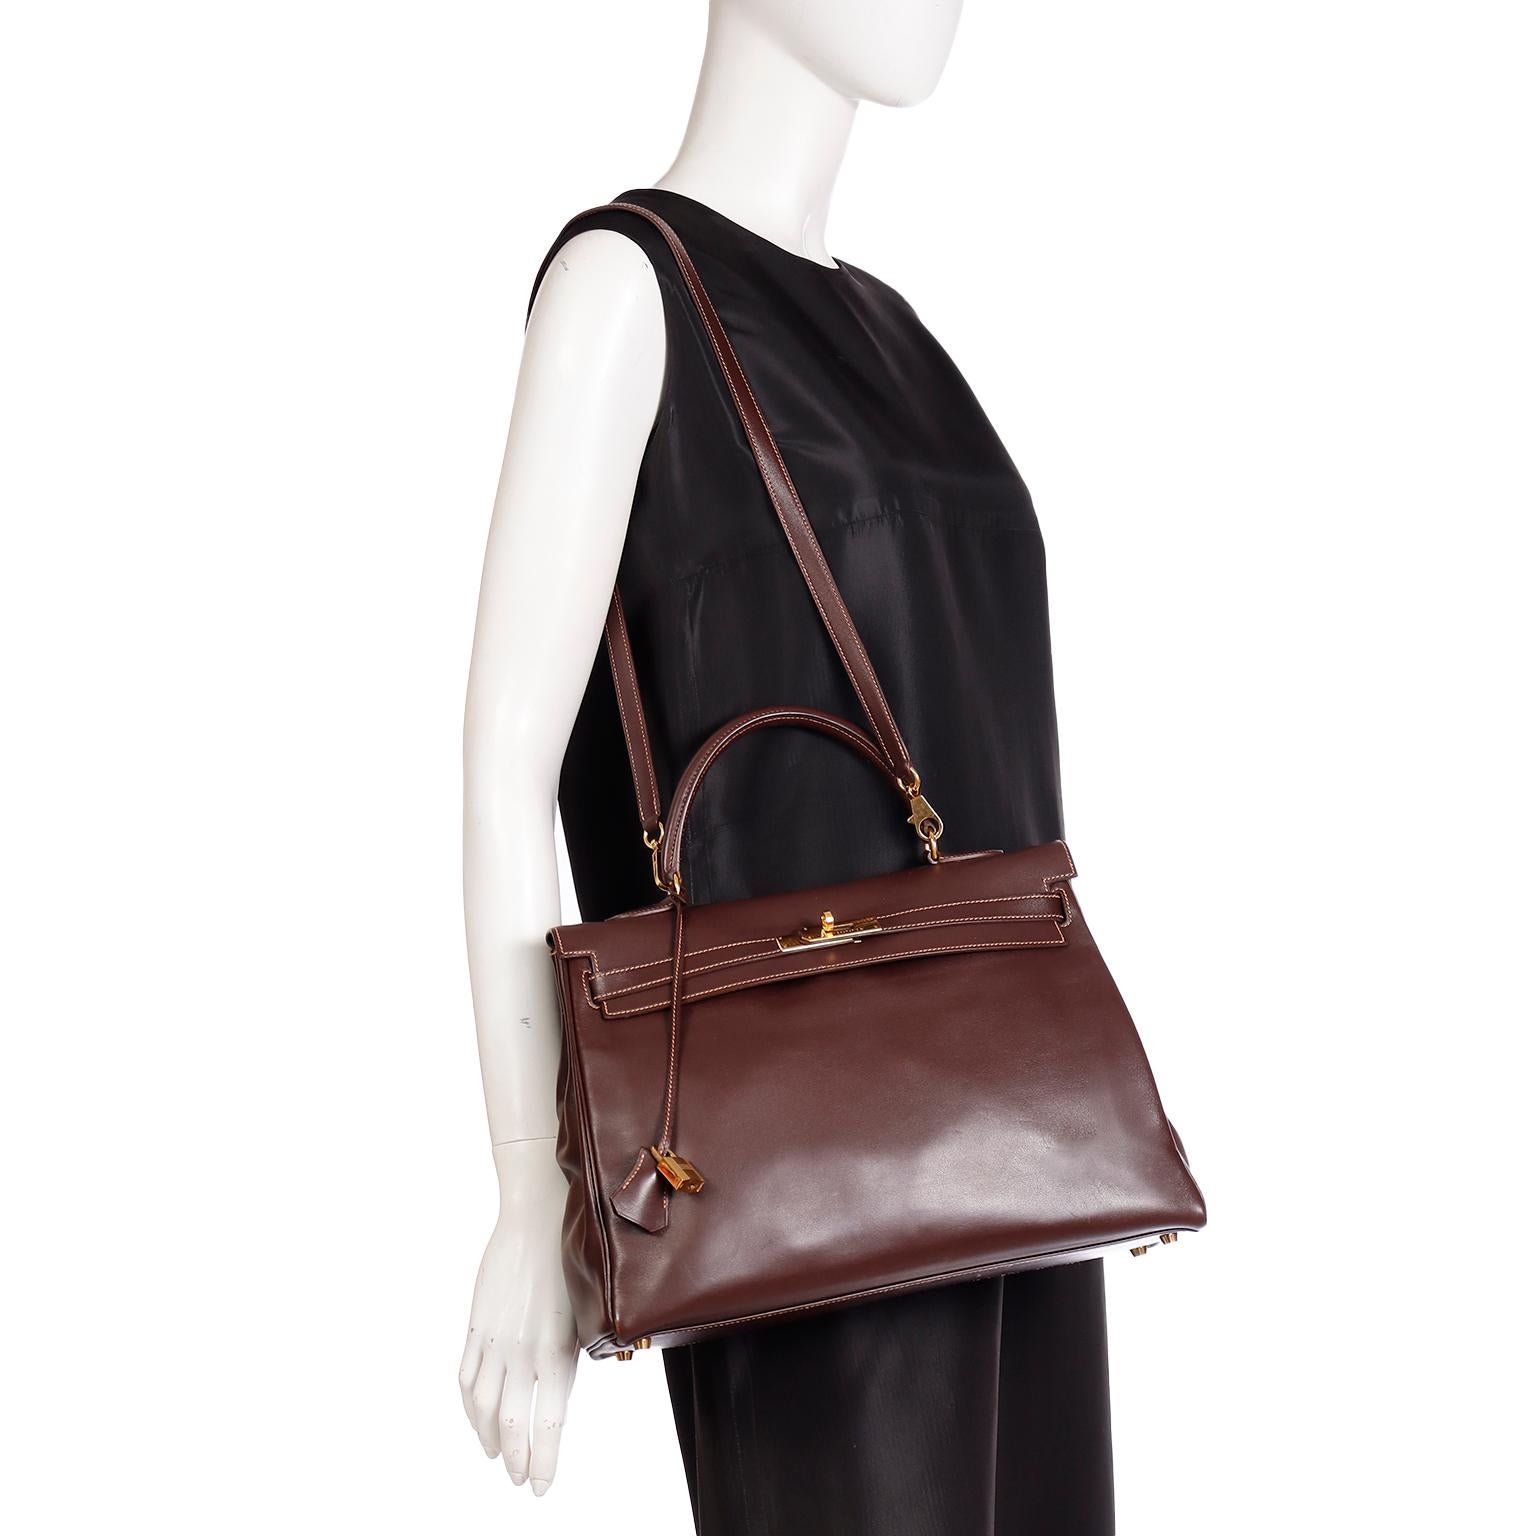 Hermes Kelly 35 Retourne Havane Gulliver Leather Bag w Rose Poudre Stitching In Excellent Condition For Sale In Portland, OR